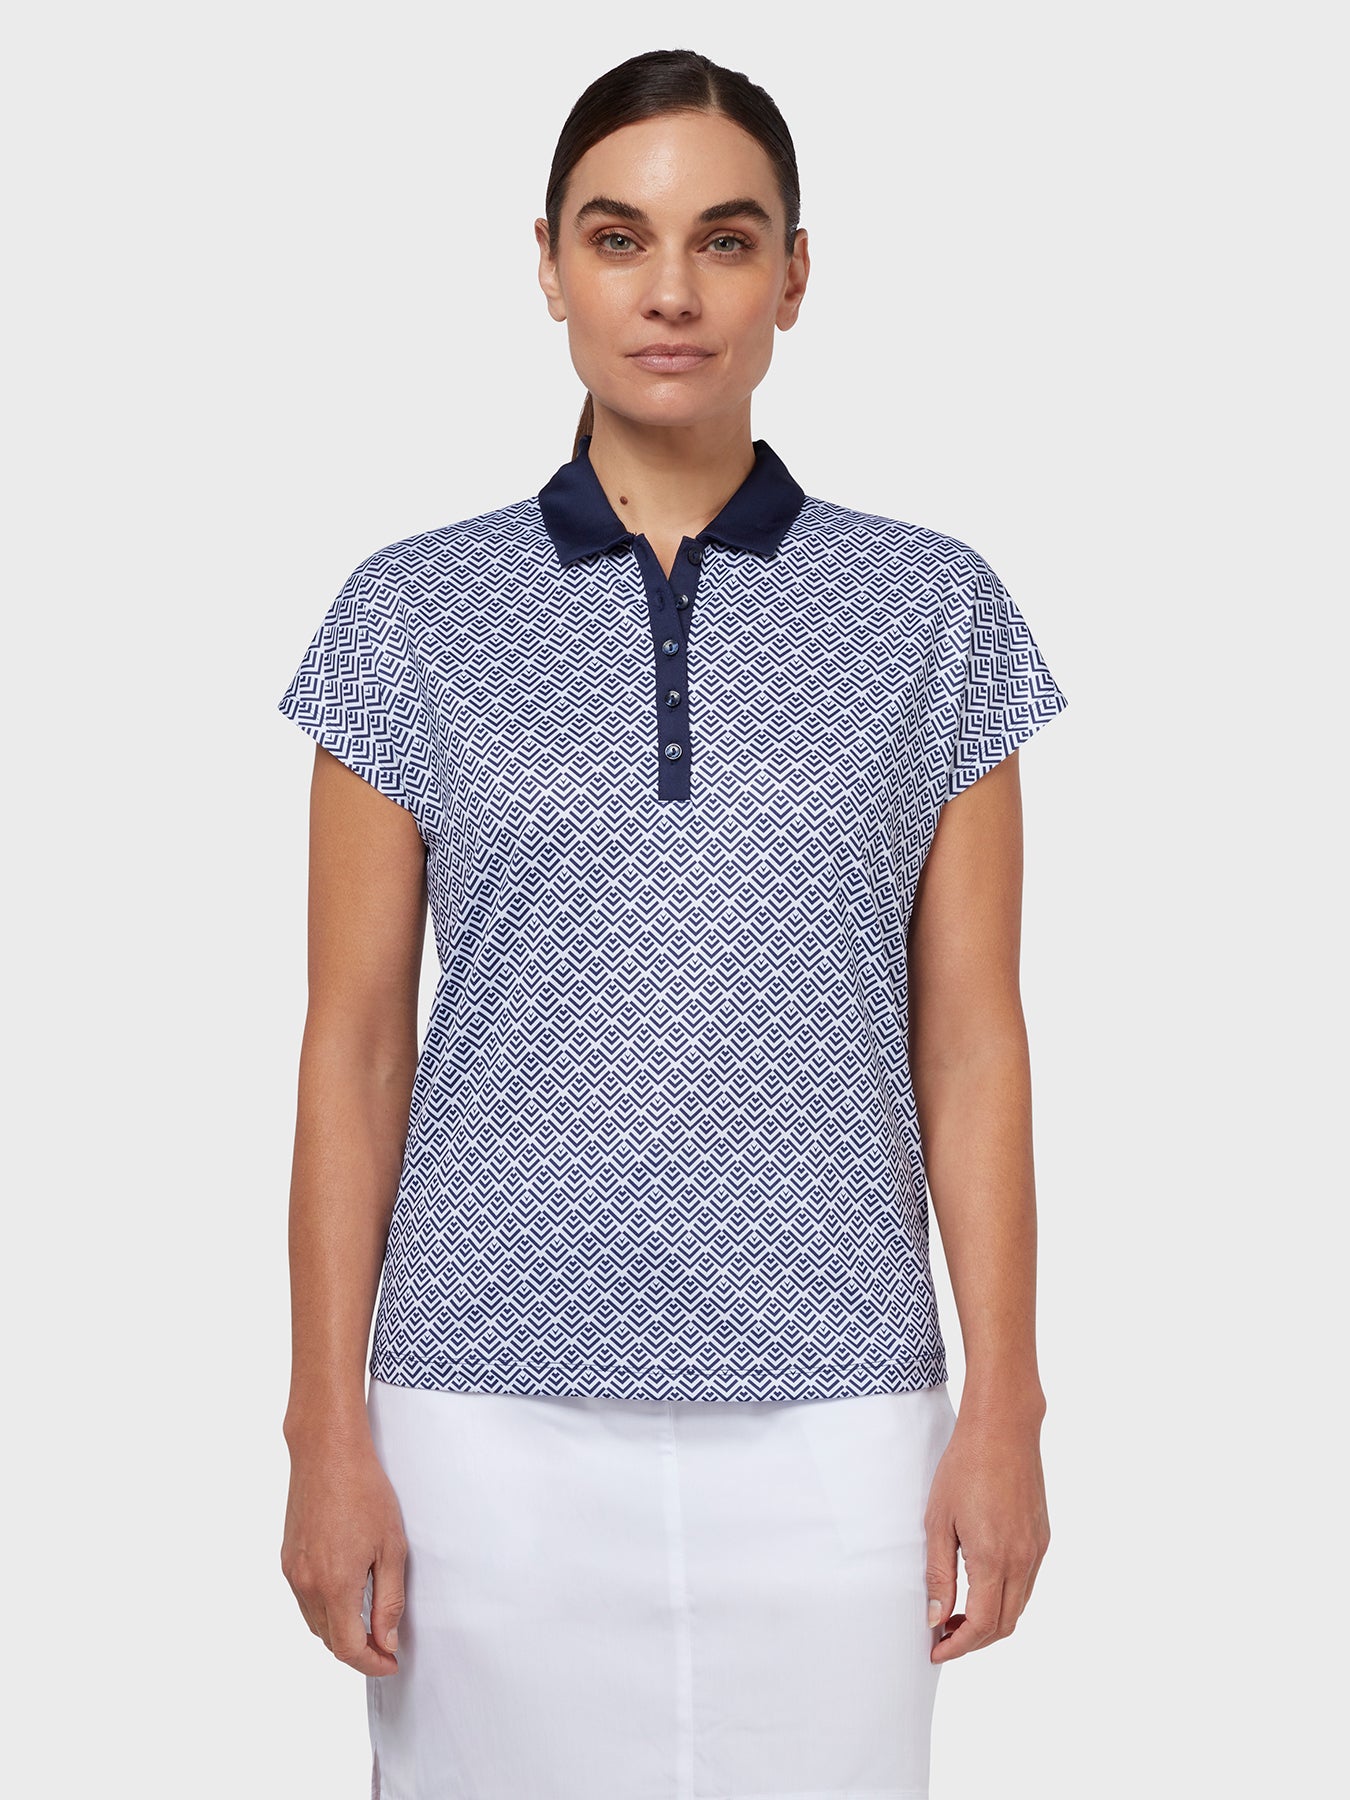 View Chev Printed Womens Polo In Blue Geo Brilliant White XS information